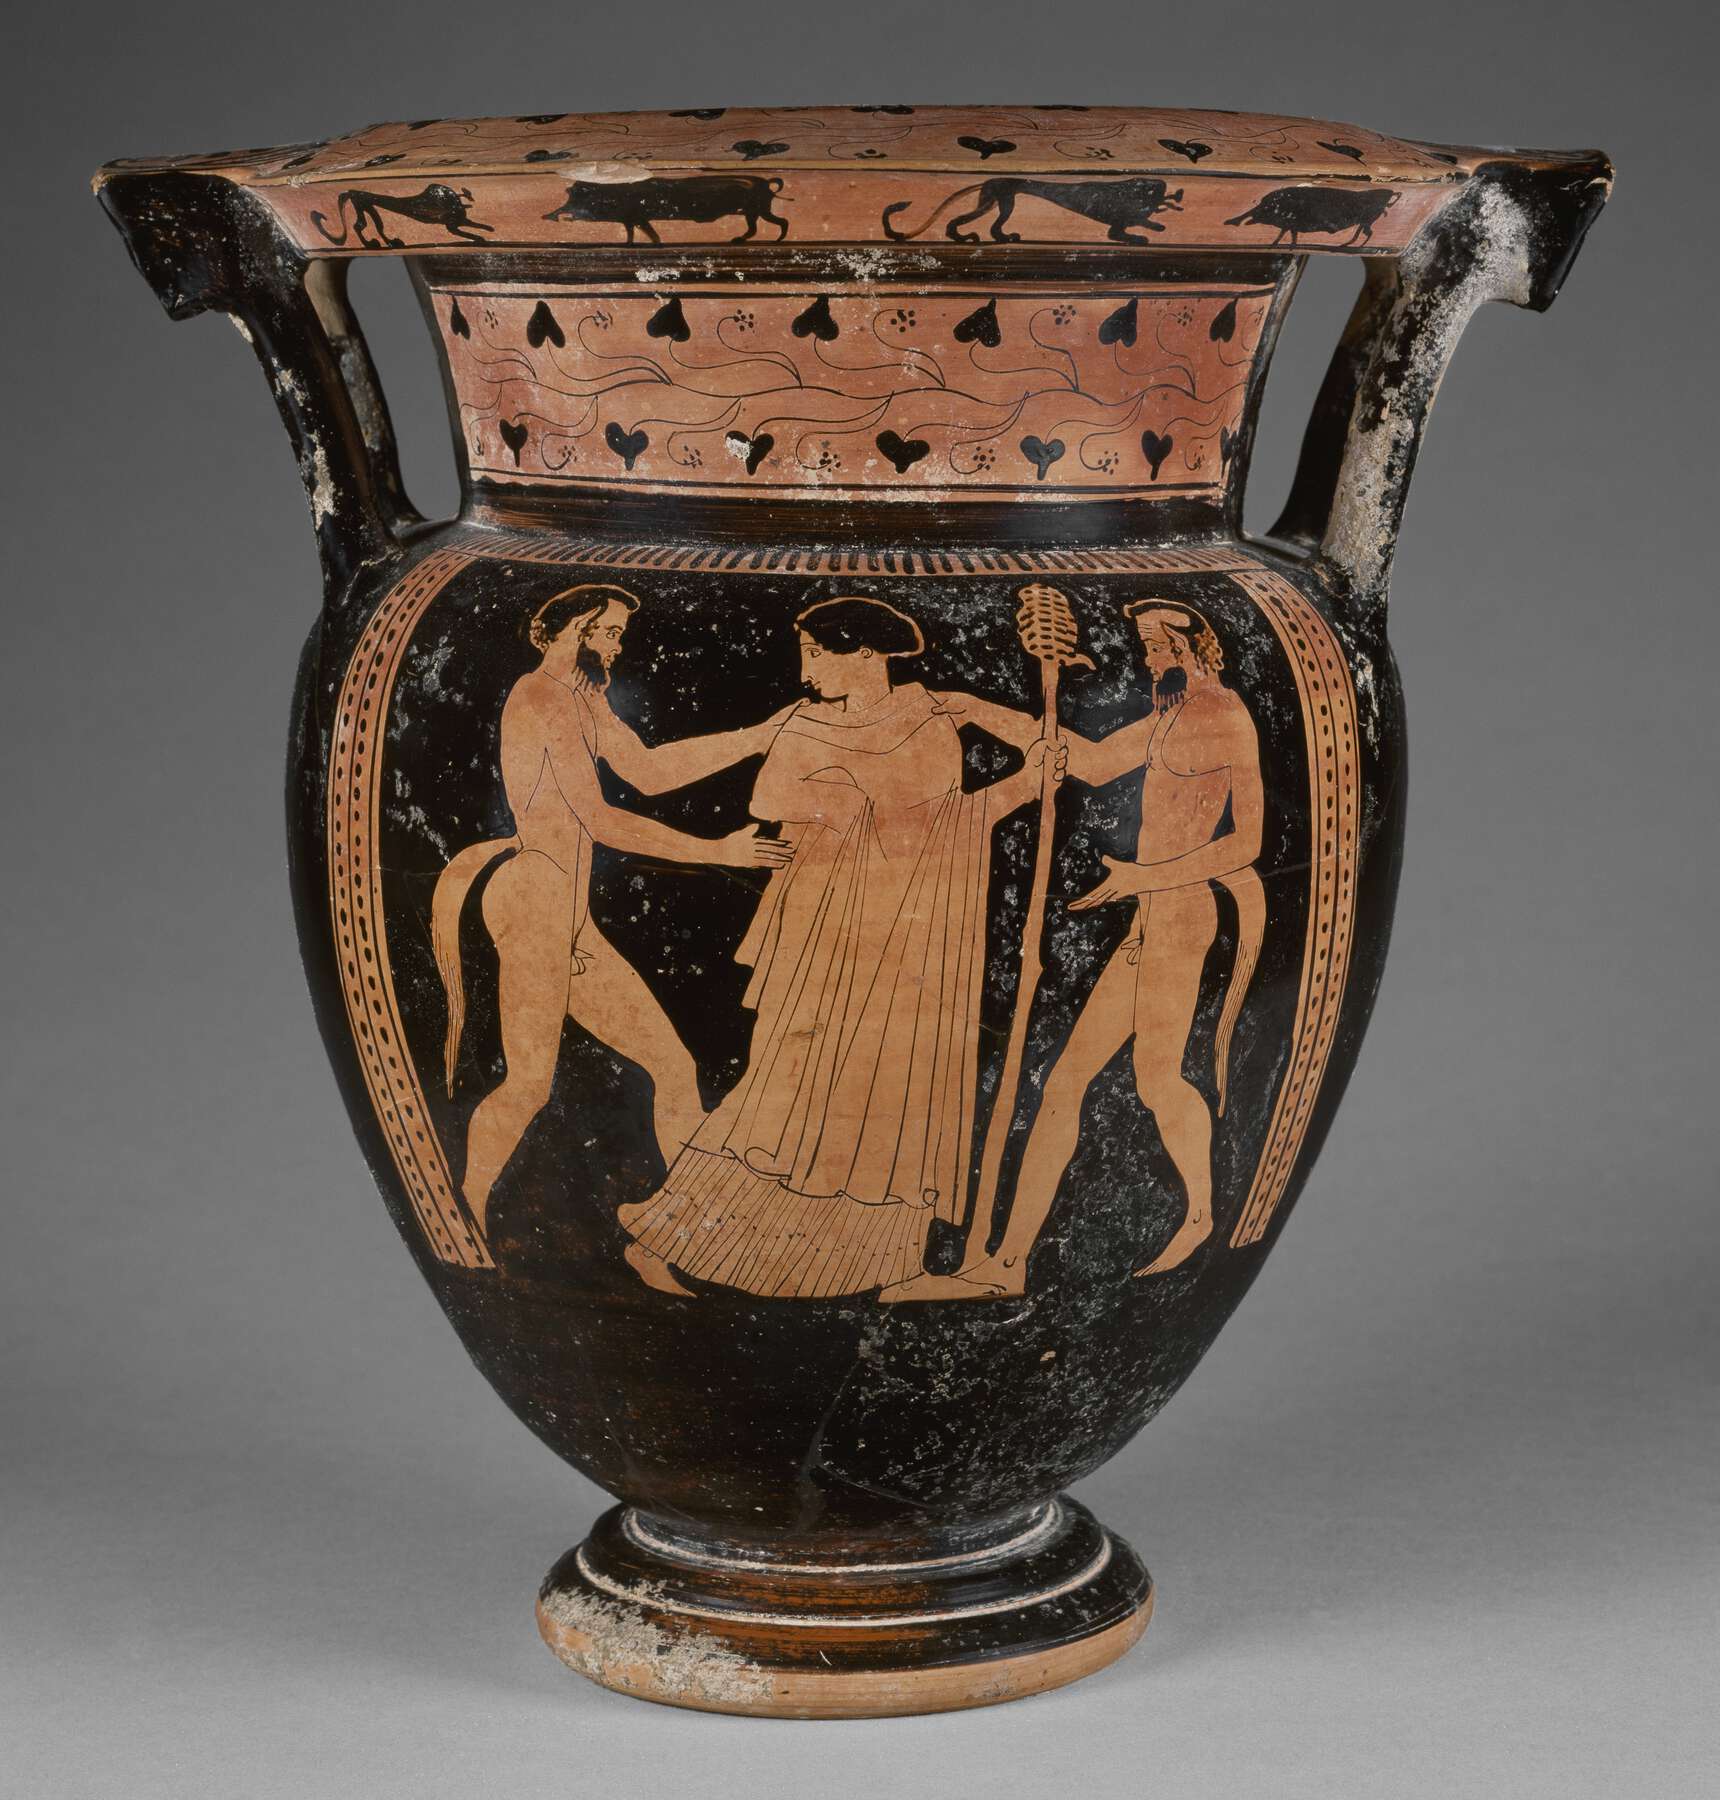 One view of a vase, with the body showing three people, two of them are naked and have tails